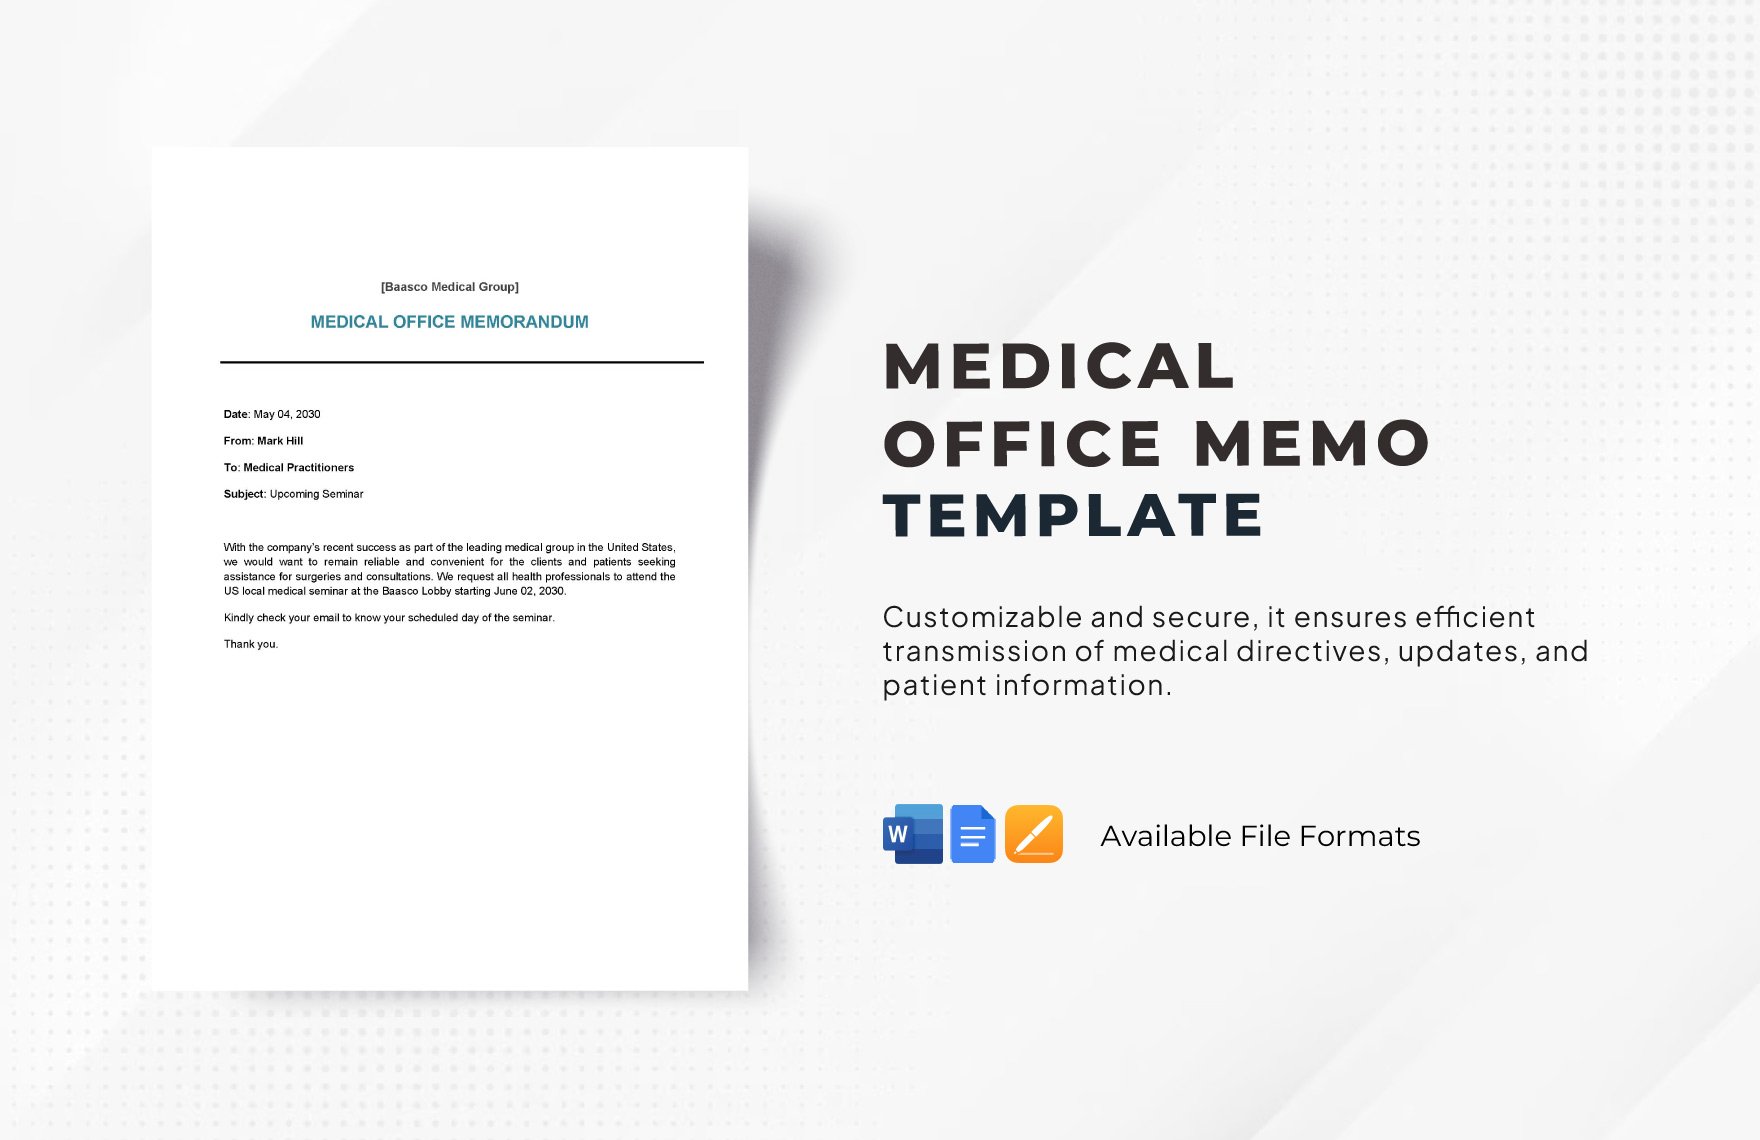 Medical Office Memo Template in Word, Google Docs, Apple Pages